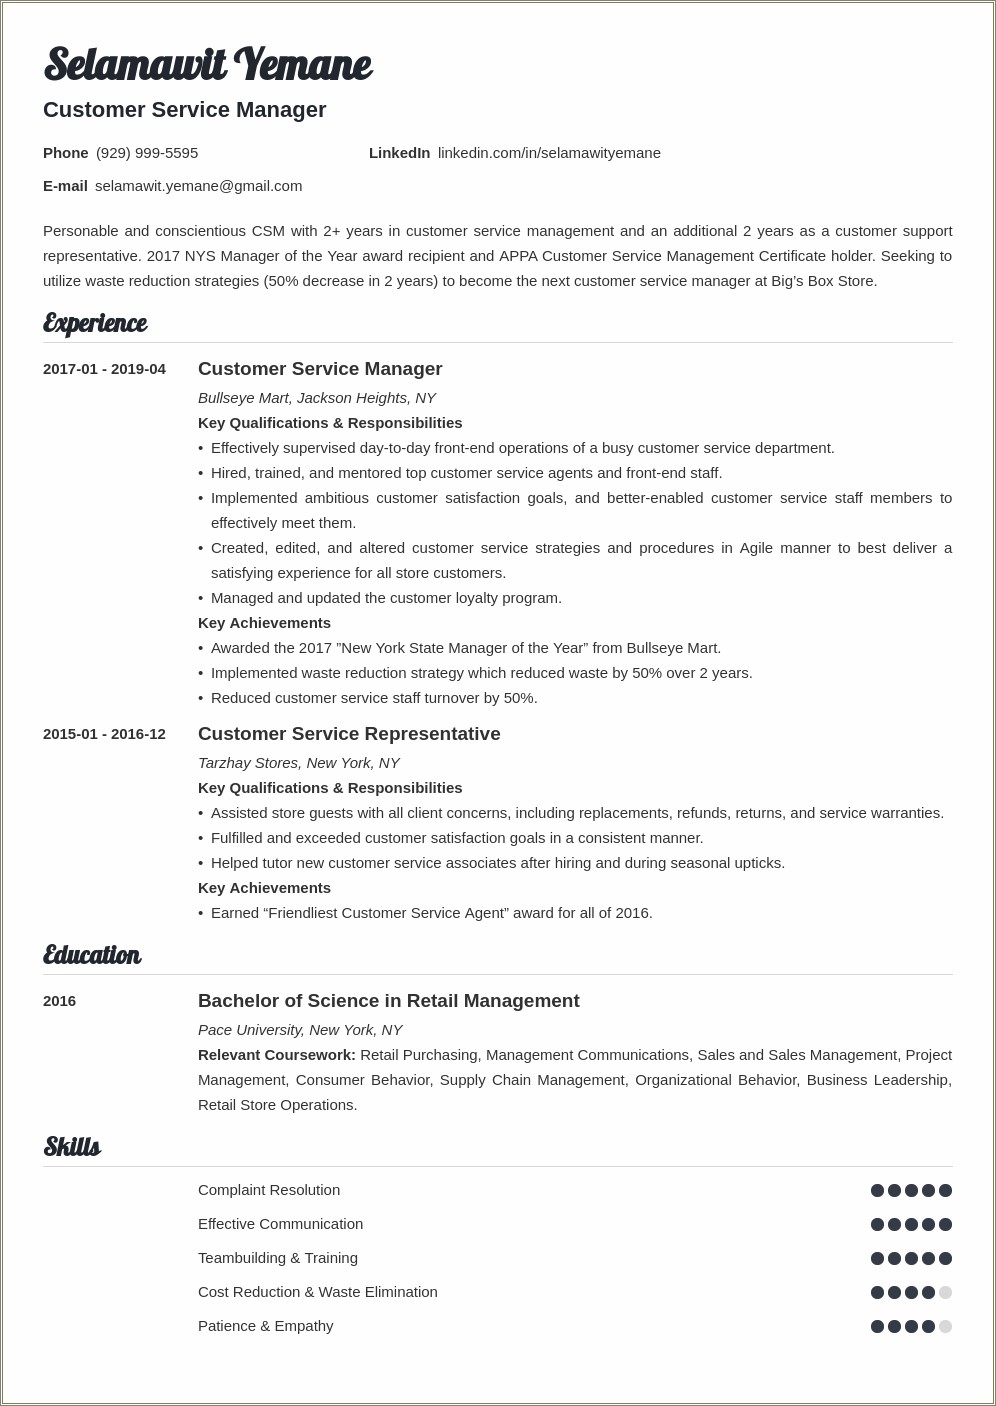 Customer Service Manager Skills And Abilities For Resume